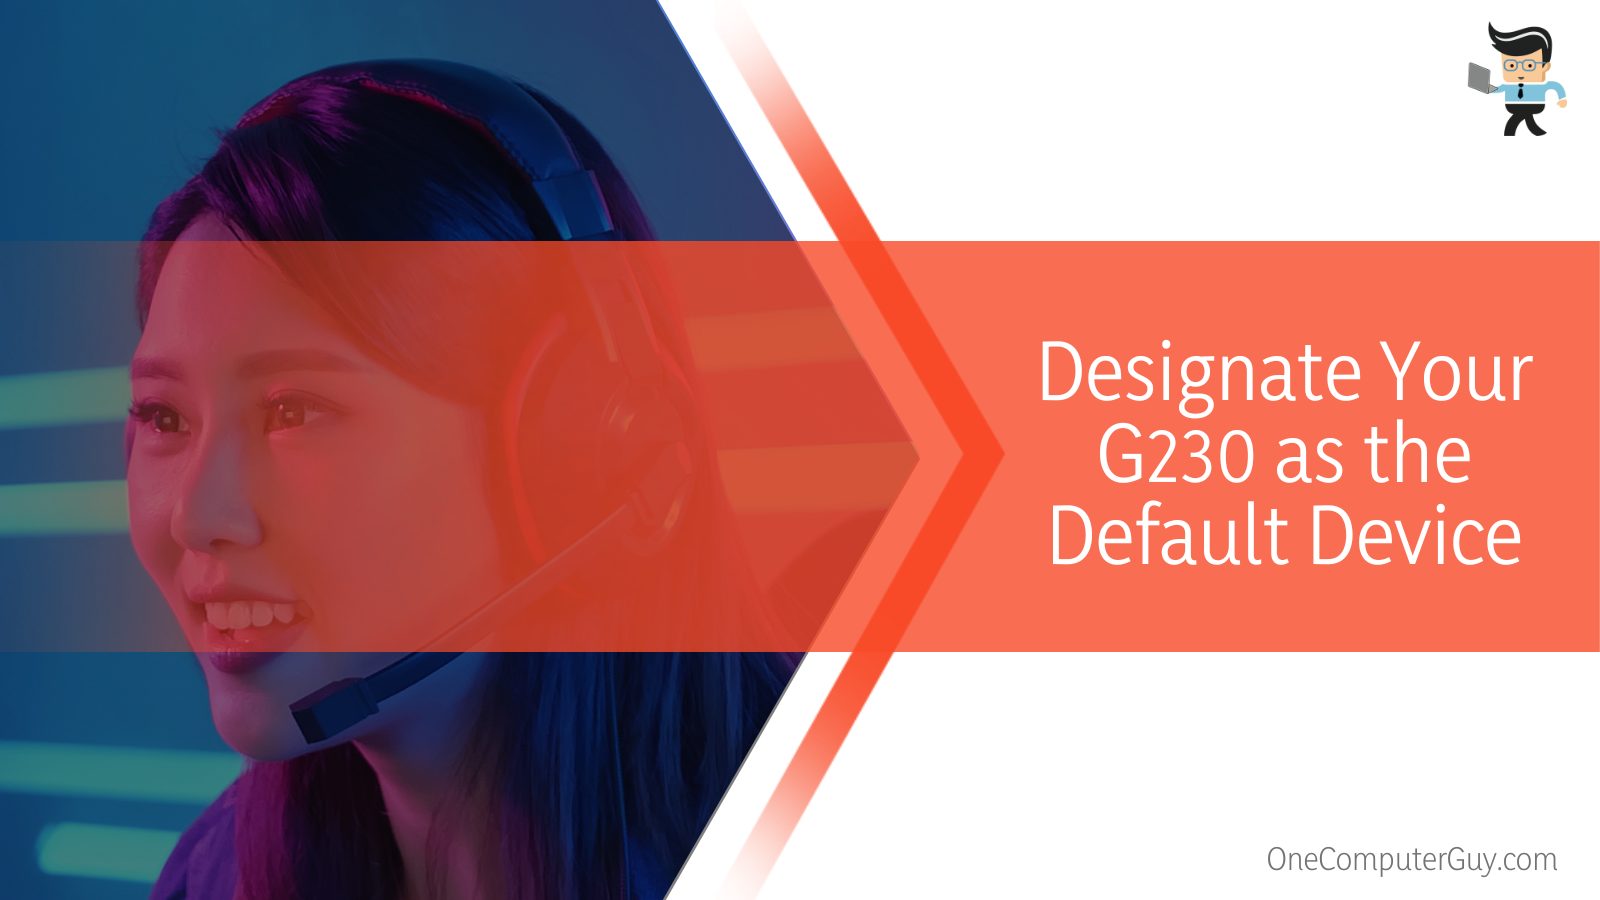 Designate Your G230 as the Default Device